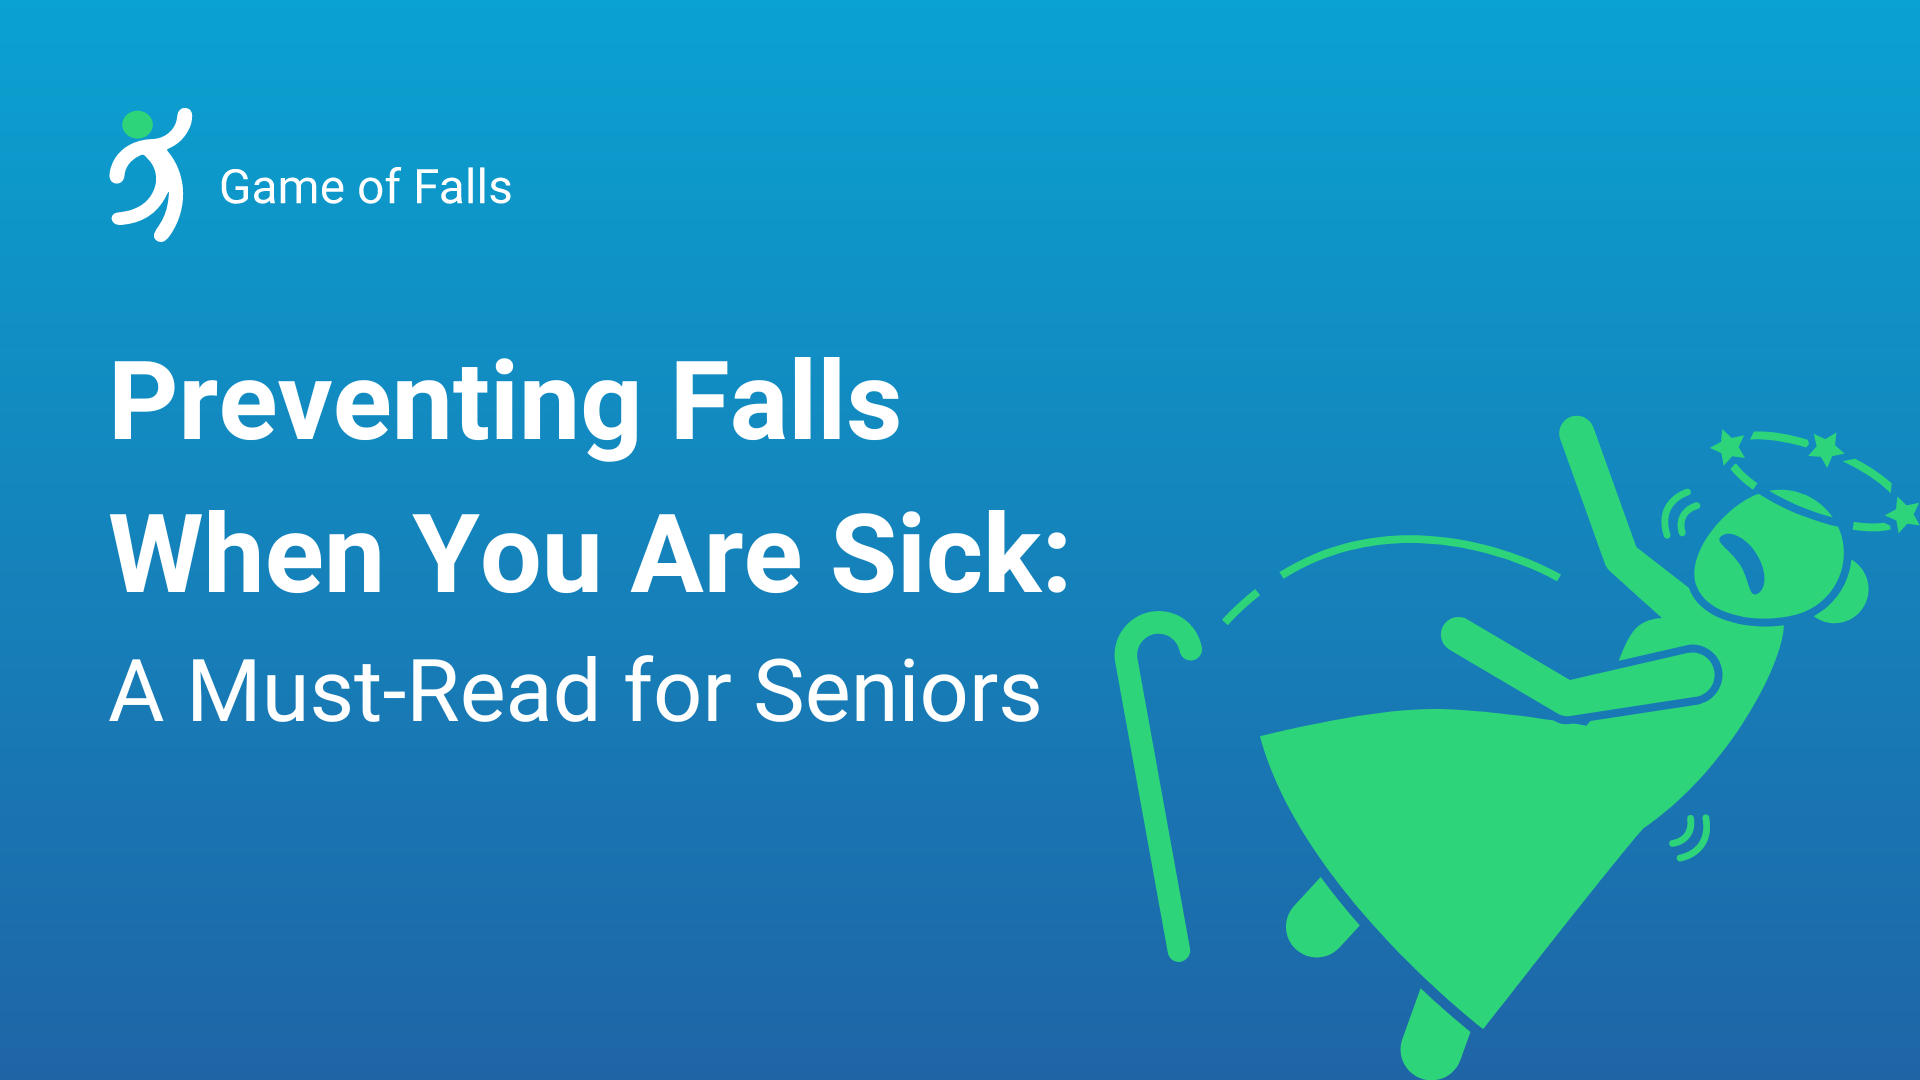 Preventing Falls When You Are Sick: A Must-Read for Seniors